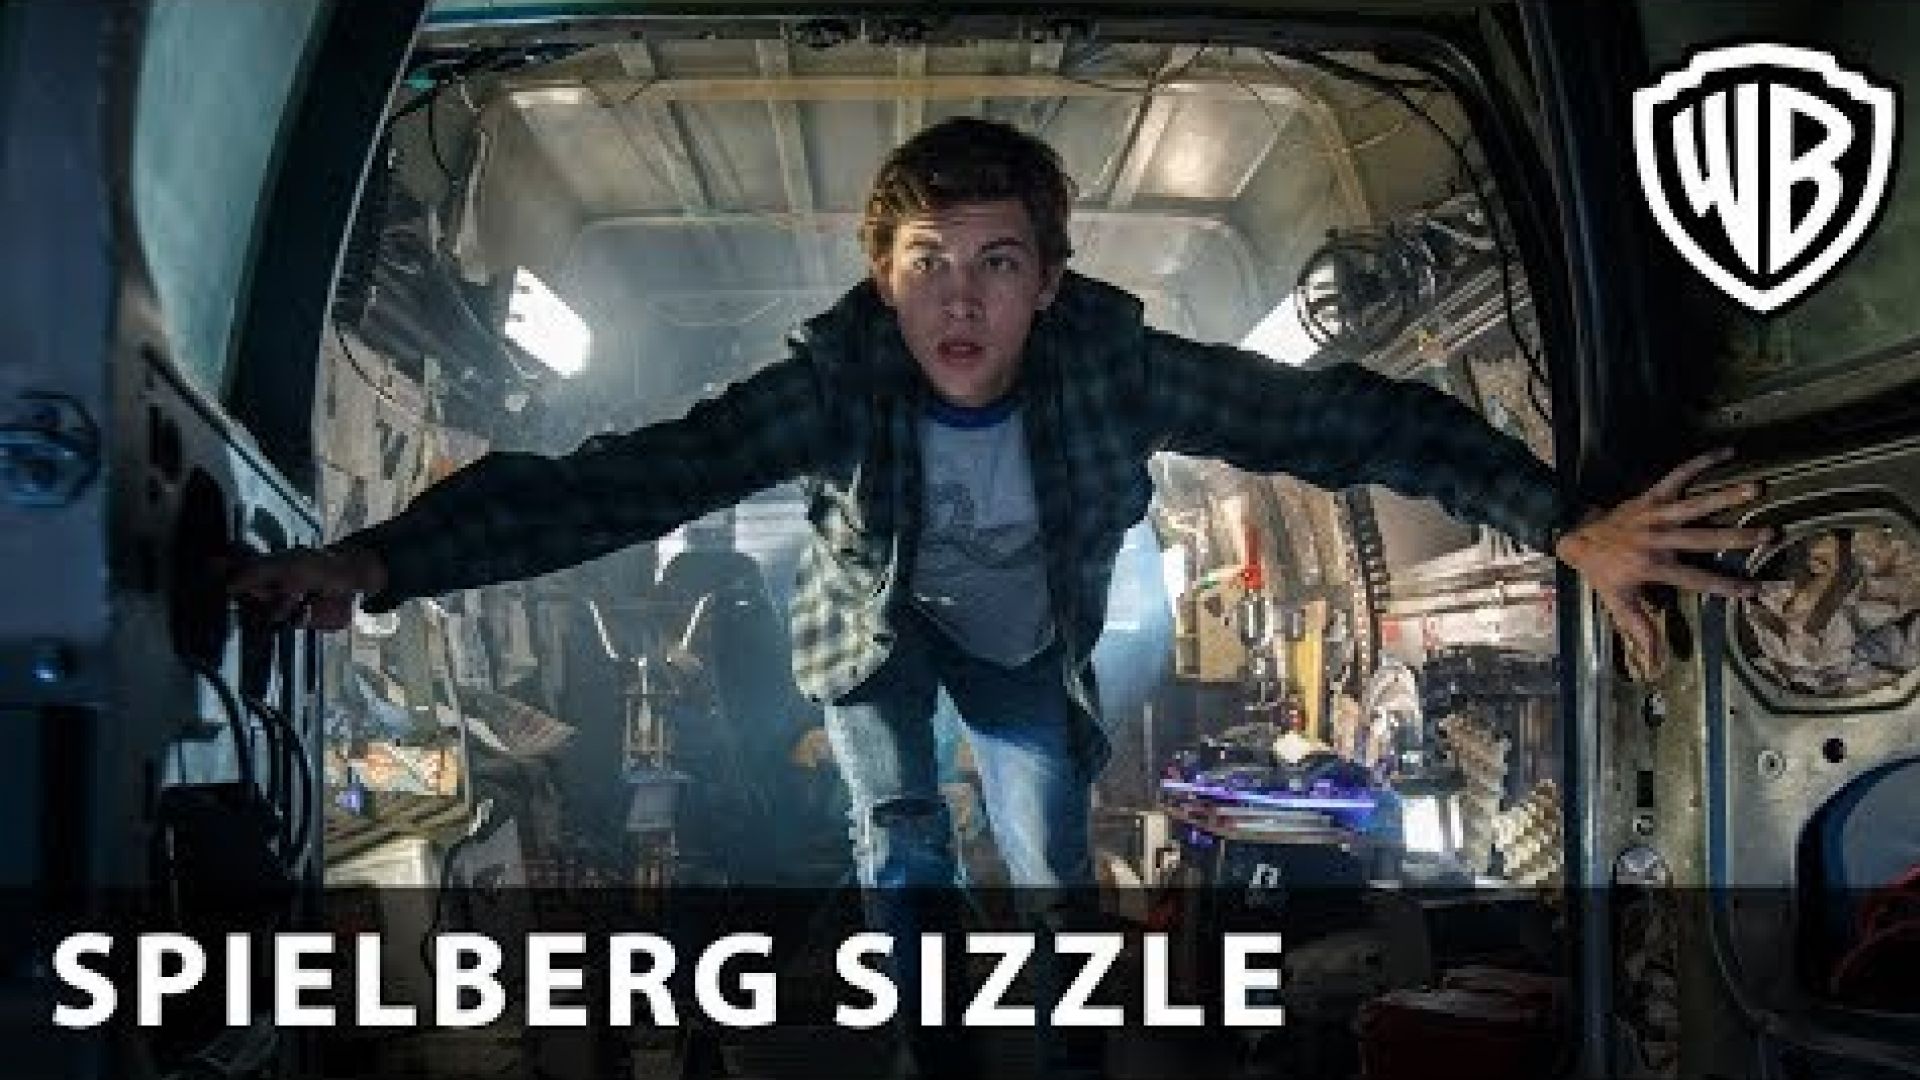 Rey Player One – See The Future Featurette